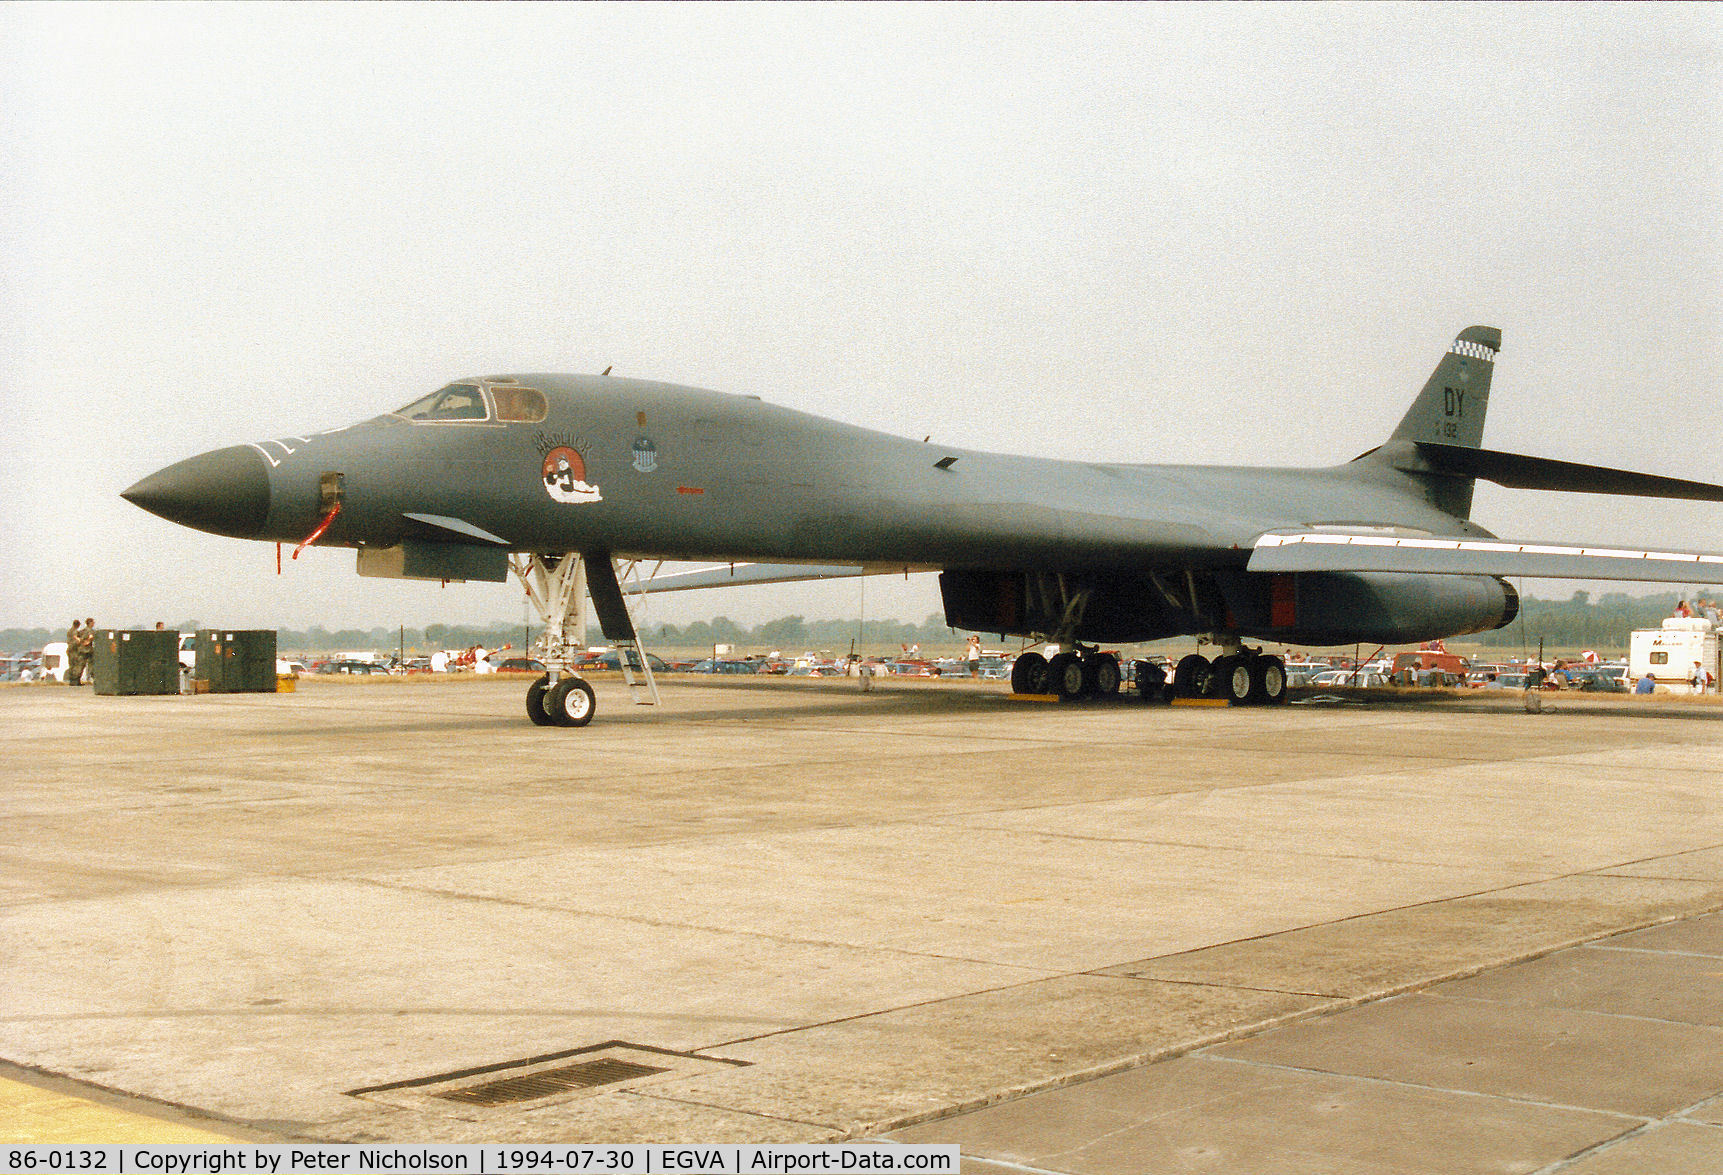 86-0132, 1986 Rockwell B-1B Lancer C/N 92, B-1B Lancer, callsign Hawk 85, of the 7th Bomb Wing at Dyess AFB on display at the 1994 Intnl Air Tattoo at RAF Fairford.